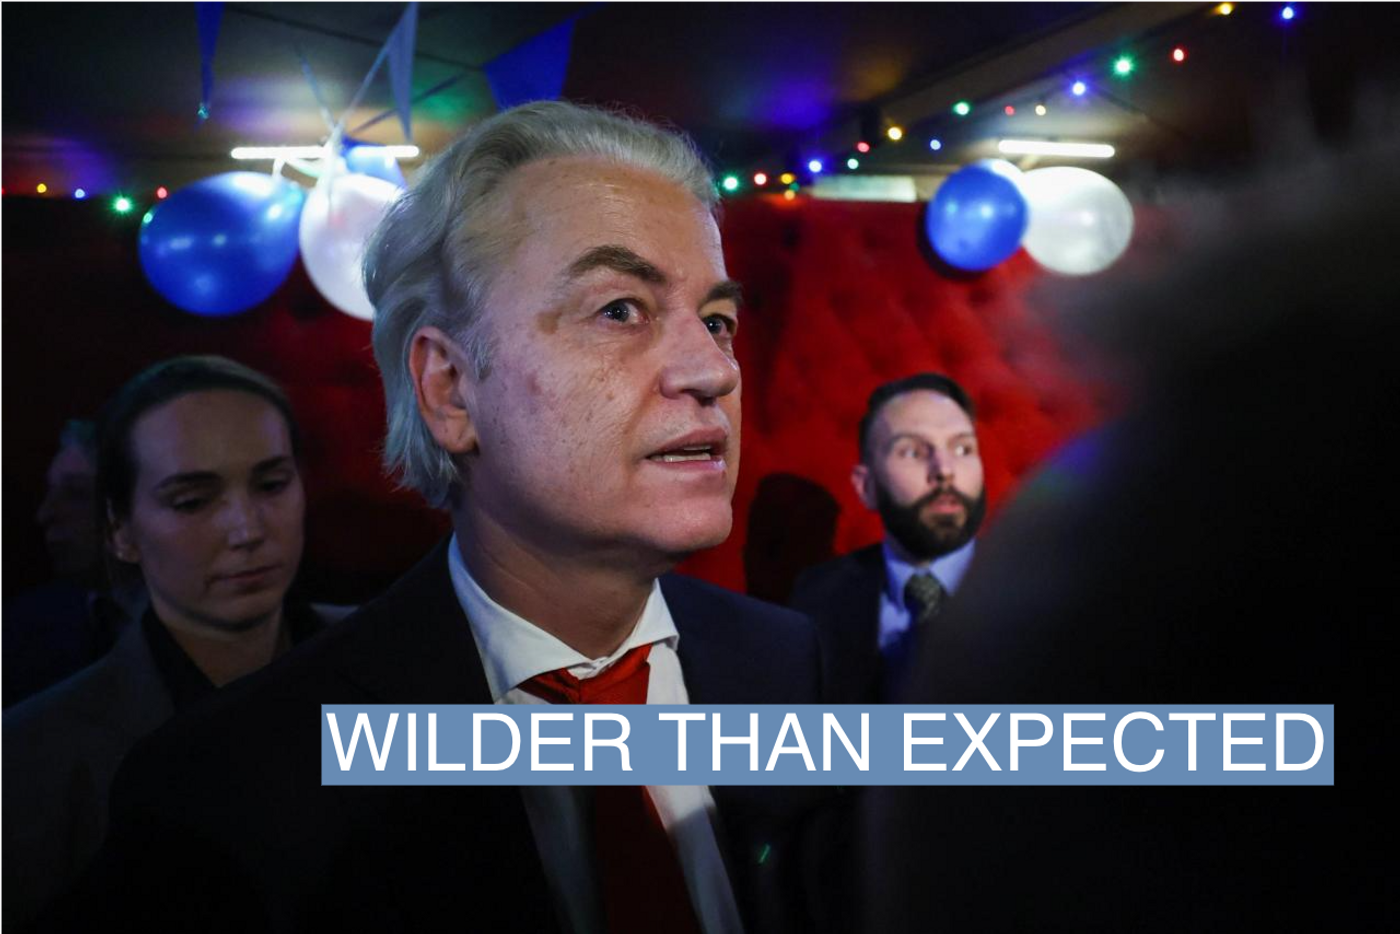 Dutch far-right politician and leader of the PVV party, Geert Wilders looks on following the exit poll and early results in the Dutch parliamentary elections, in The Hague, Netherlands November 22, 2023. REUTERS/Yves Herman